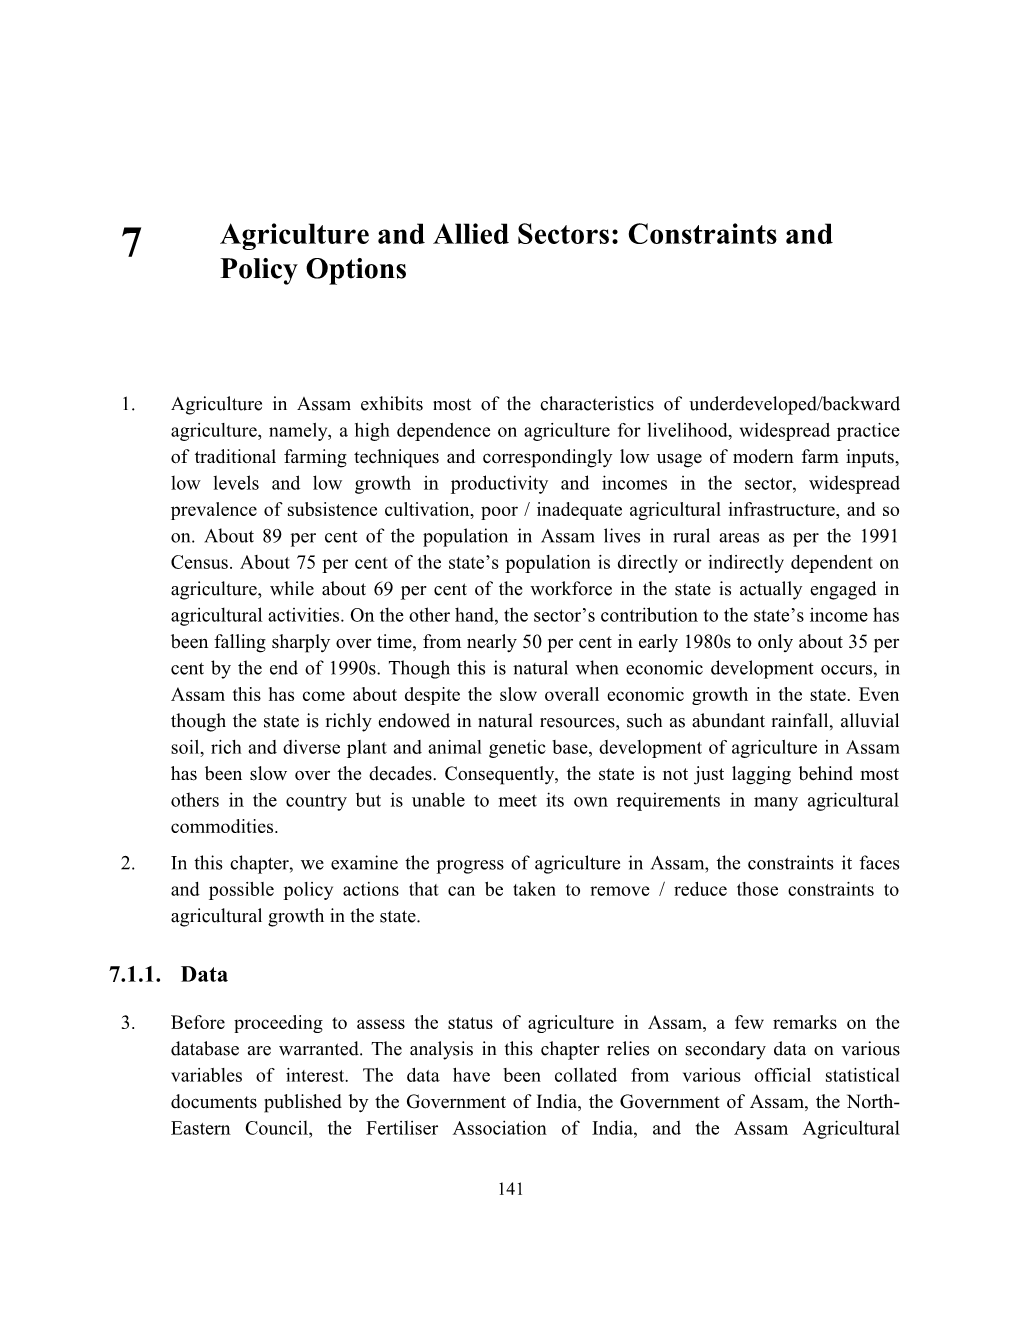 In This Chapter, We Examine the Progress of Agriculture in Assam, the Constraints It Faces